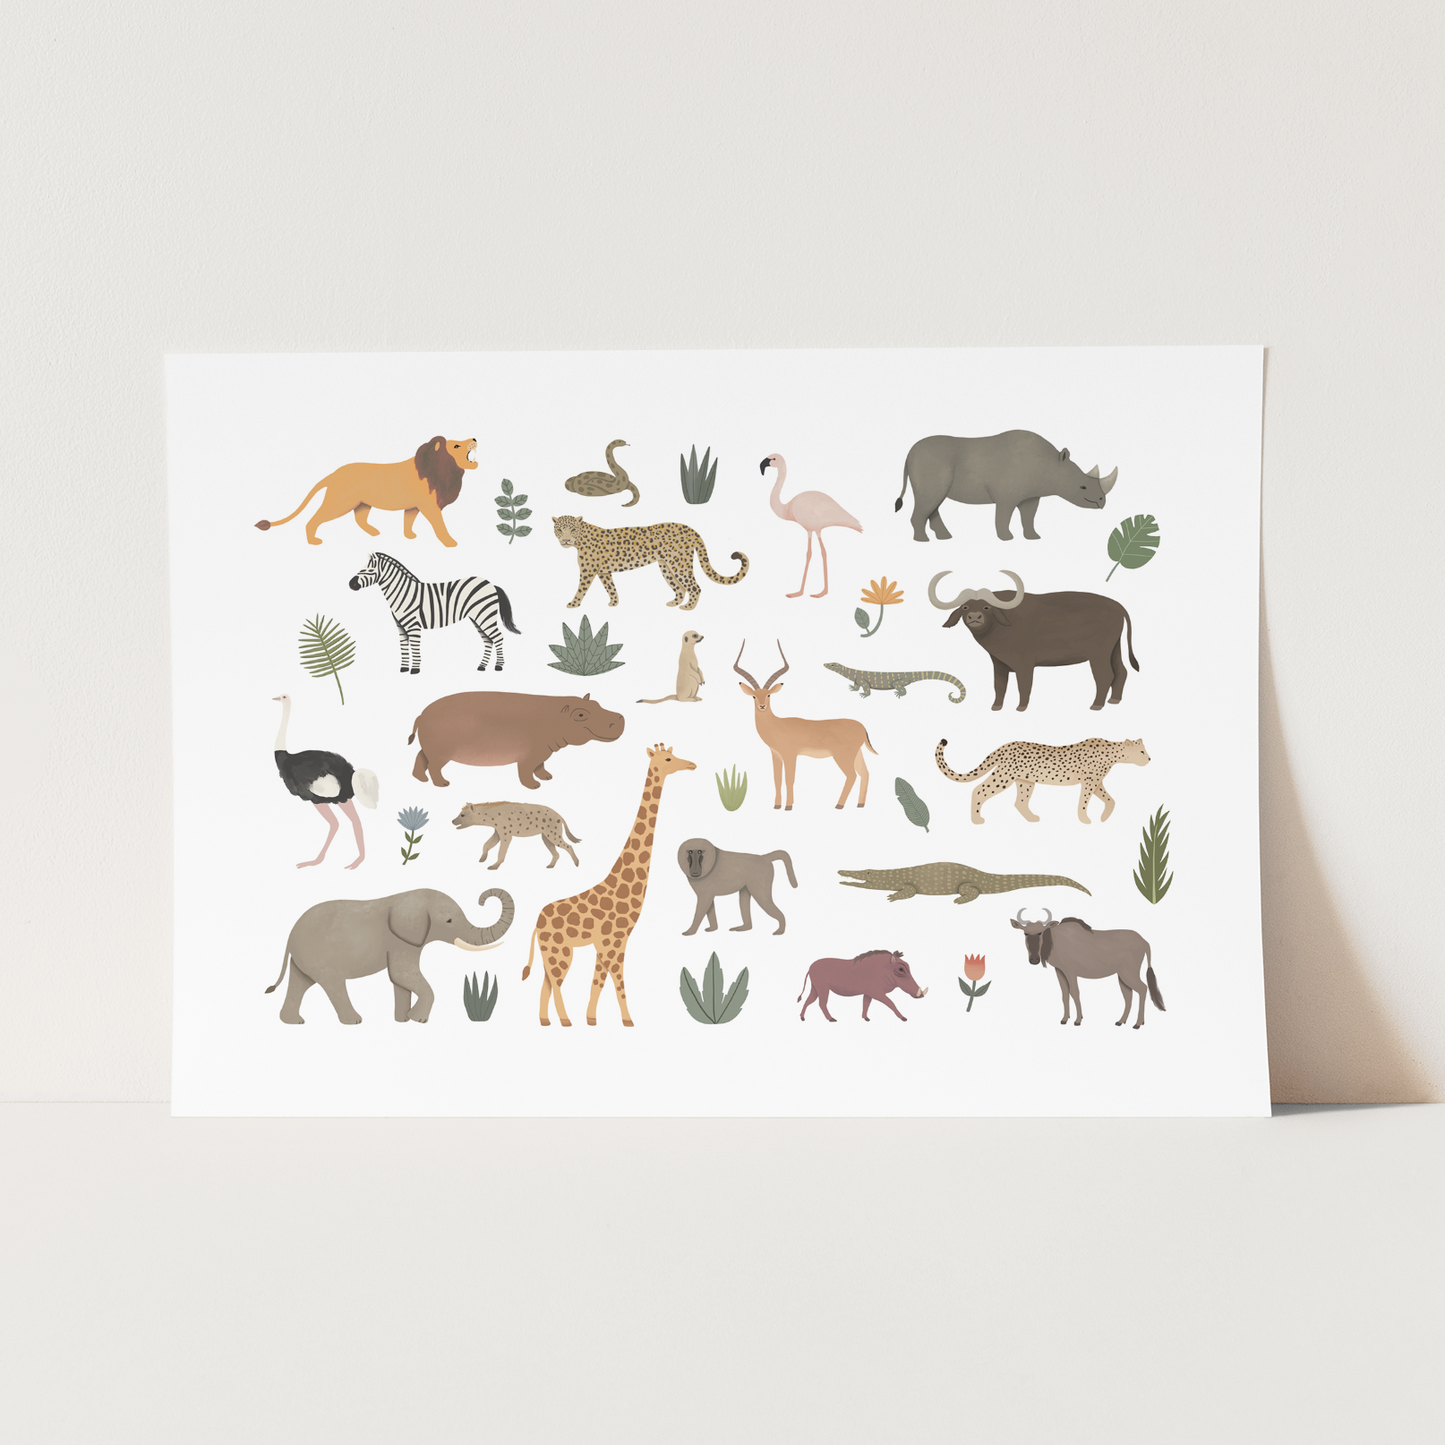 Safari Animal Art Print by Kid of the Village (6 Sizes Available)